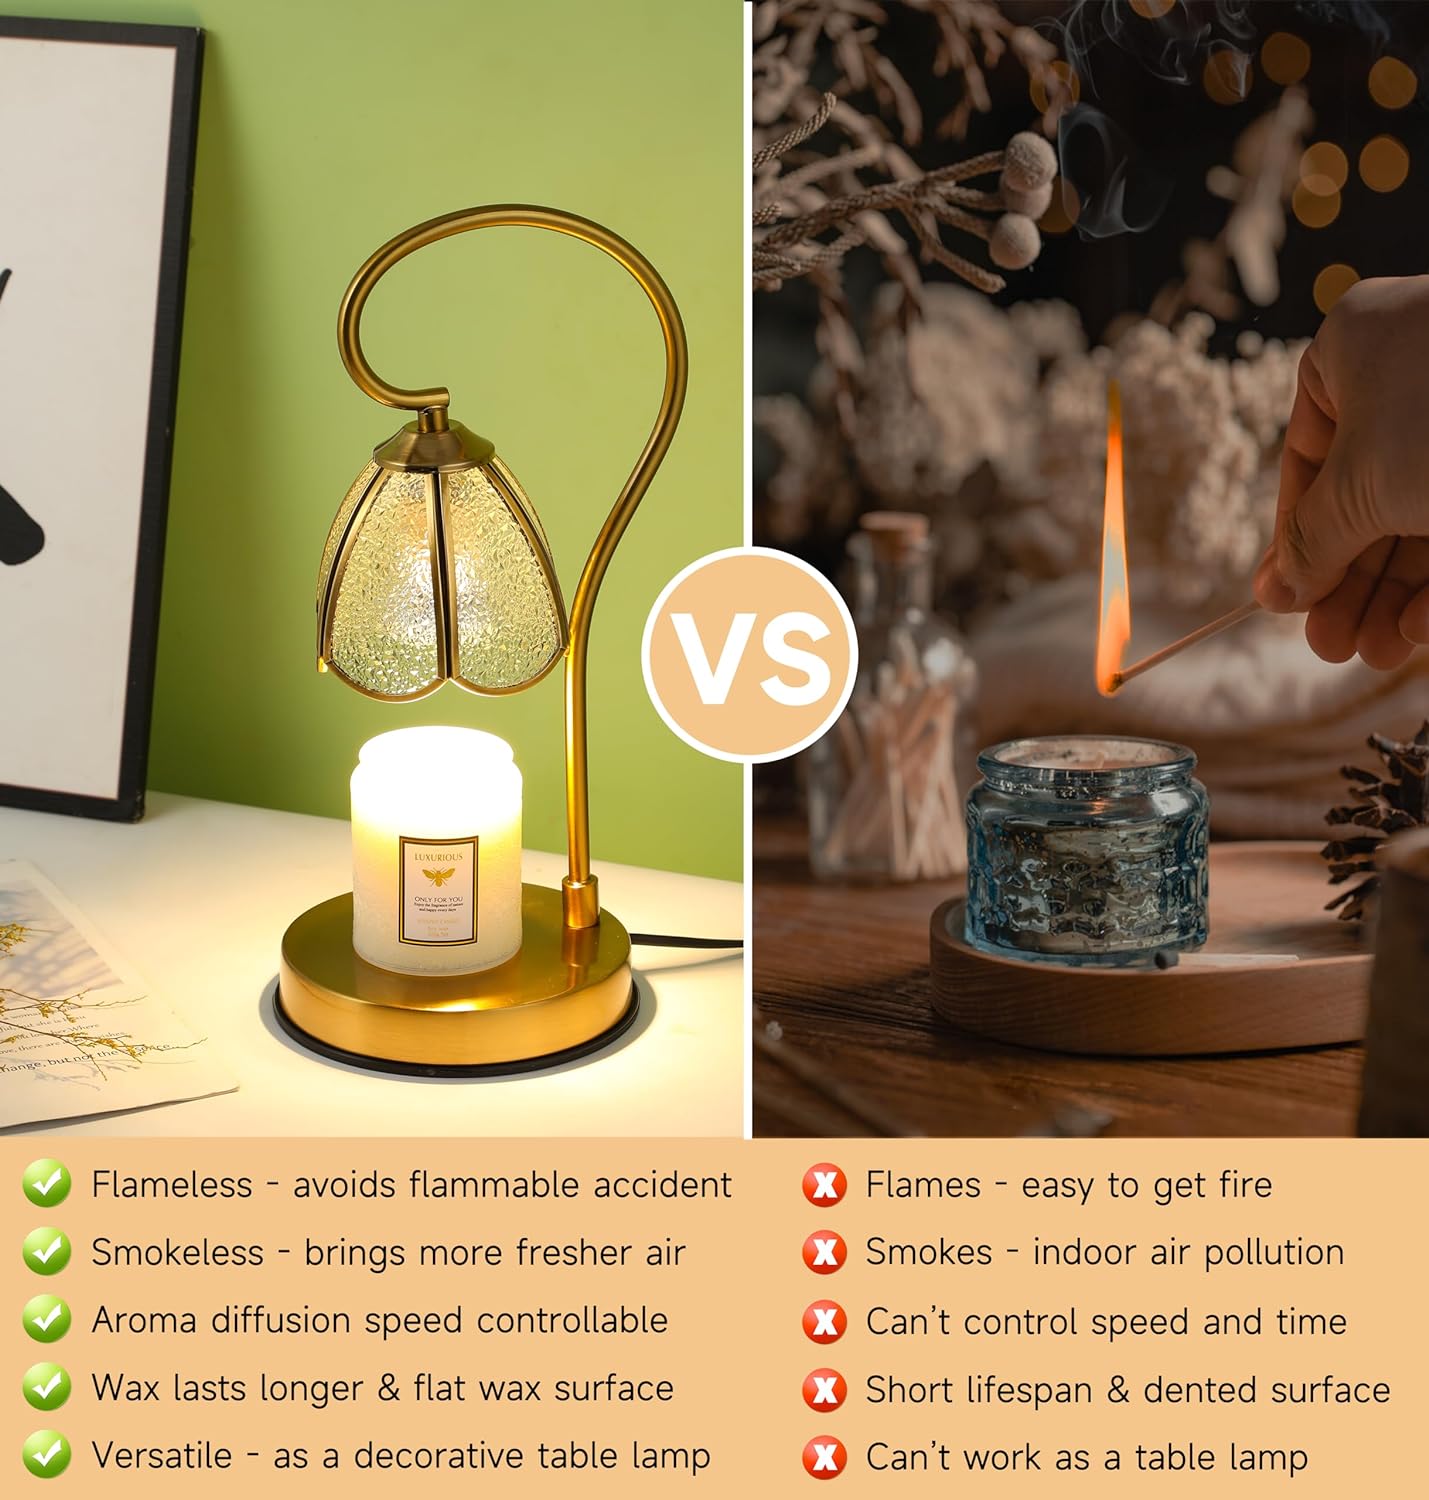 Candle Warmer Lamp Australia for Jar with 2 Bulbs, Dimmable Electric Candle Wax Melting Lamp with Timer Romantic White Flower Lampshade for Bedroom Decor or Housewarming, Valentine's Day Gift